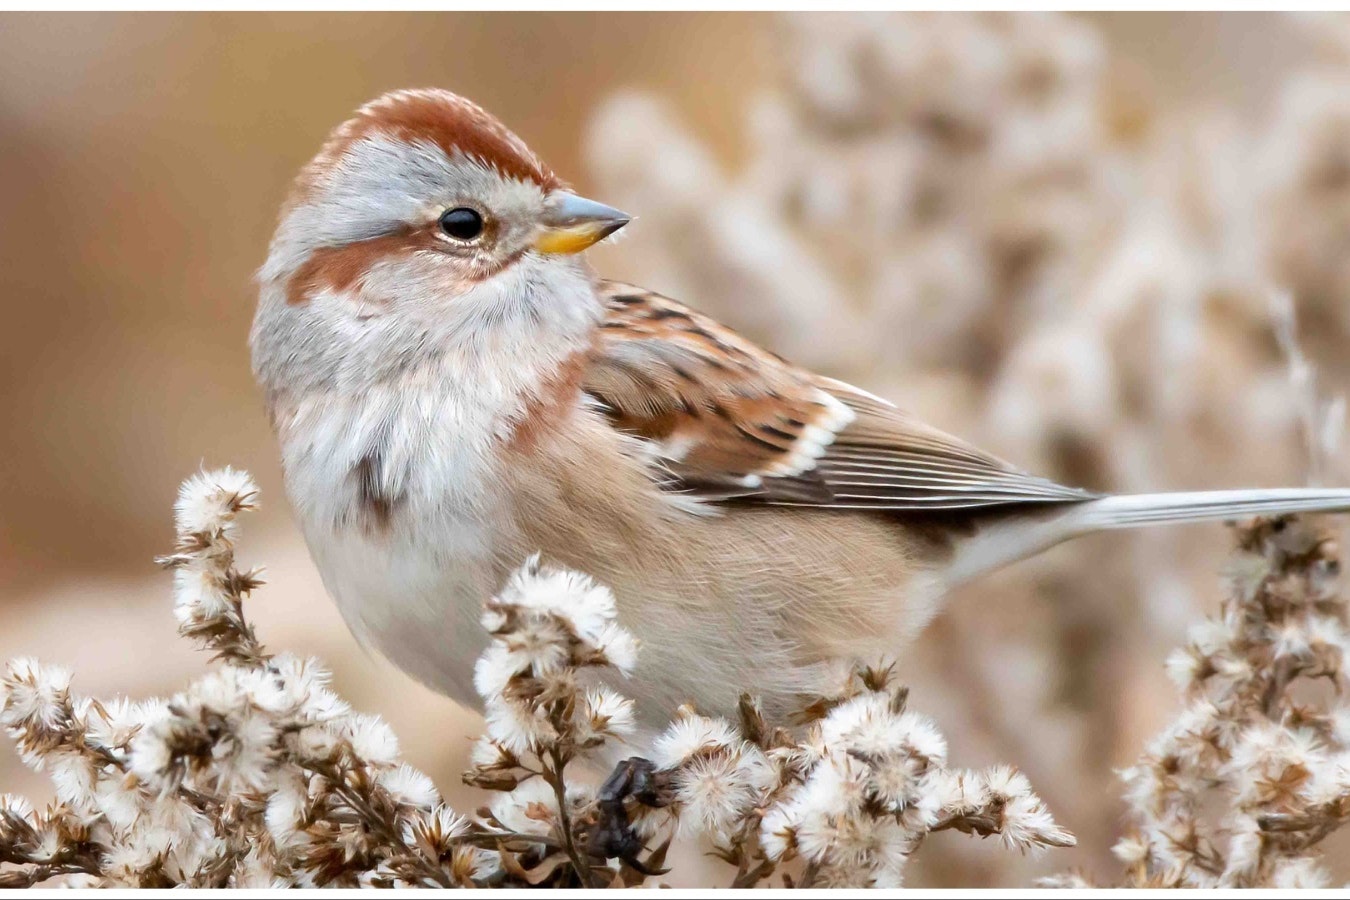 When Wyoming birders searched for American tree sparrows and Rough-legged hawks this year, the birds were scarce. Enthusiasts are blaming the warmer winter.